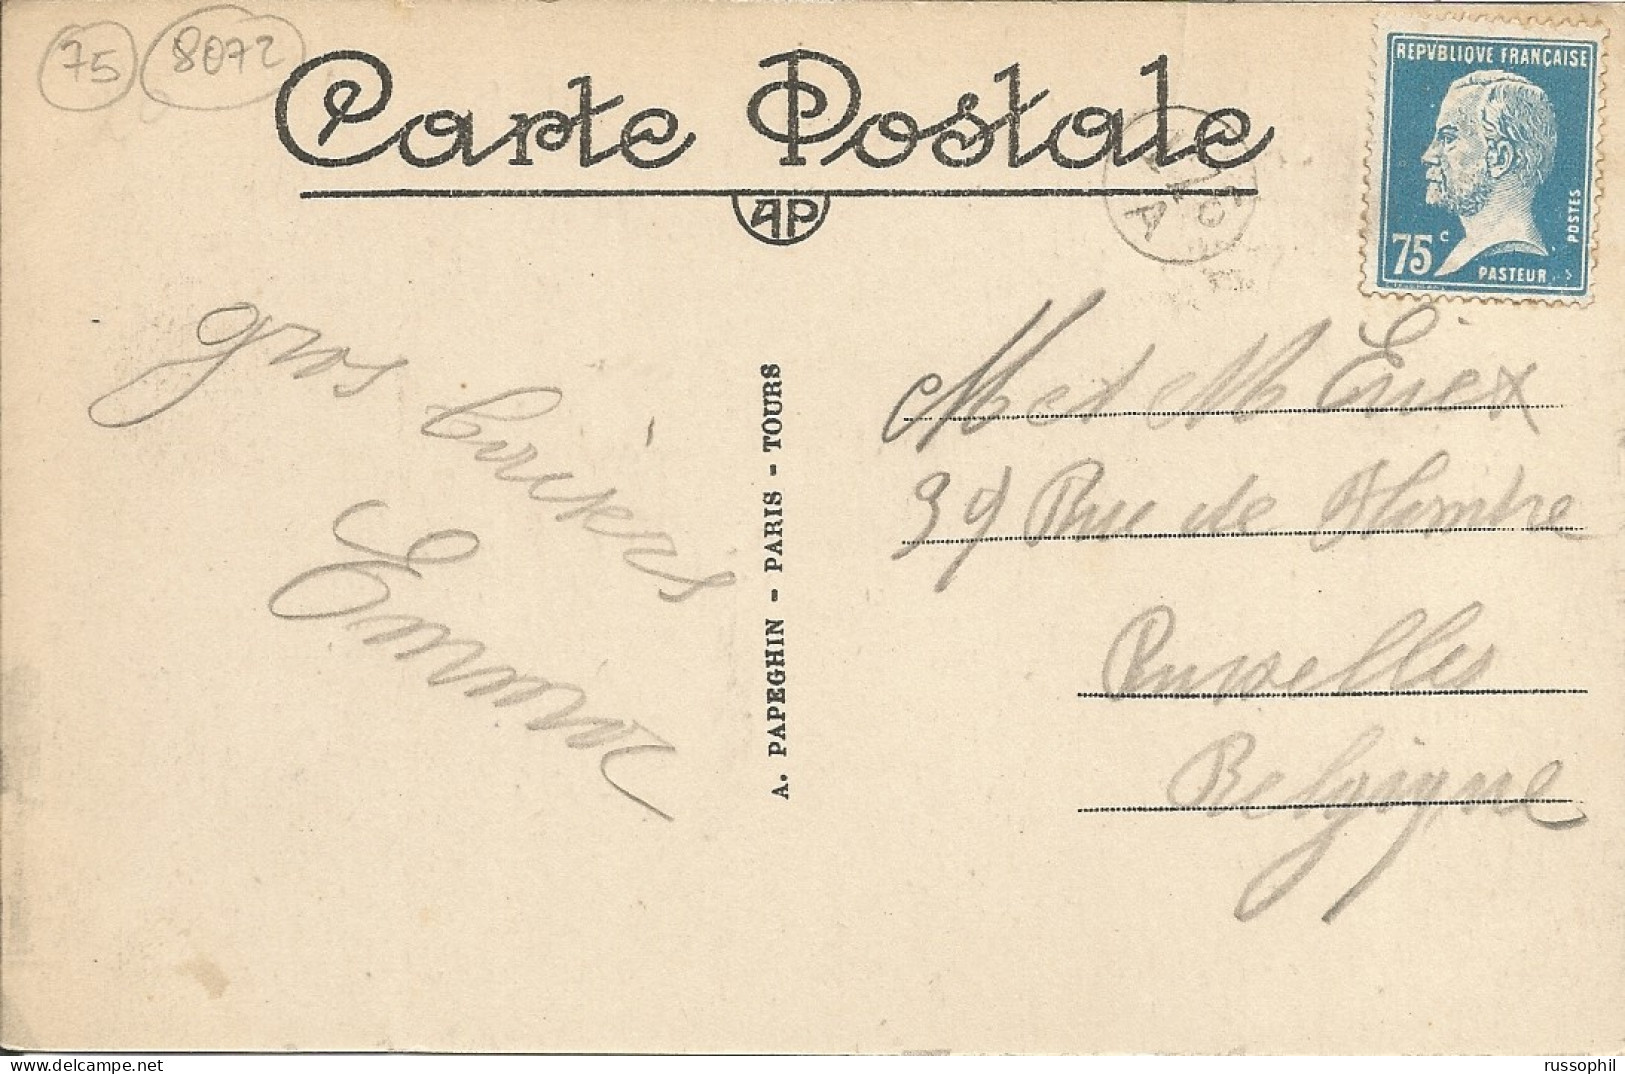 FRANCE -  VARIETY & CURIOSITY - Yv #177 ALONE FRANKING PC TO BELGIUM - PC DISTRIBUTED BUT STAMP NOT CANCELLED - 1926 - Covers & Documents